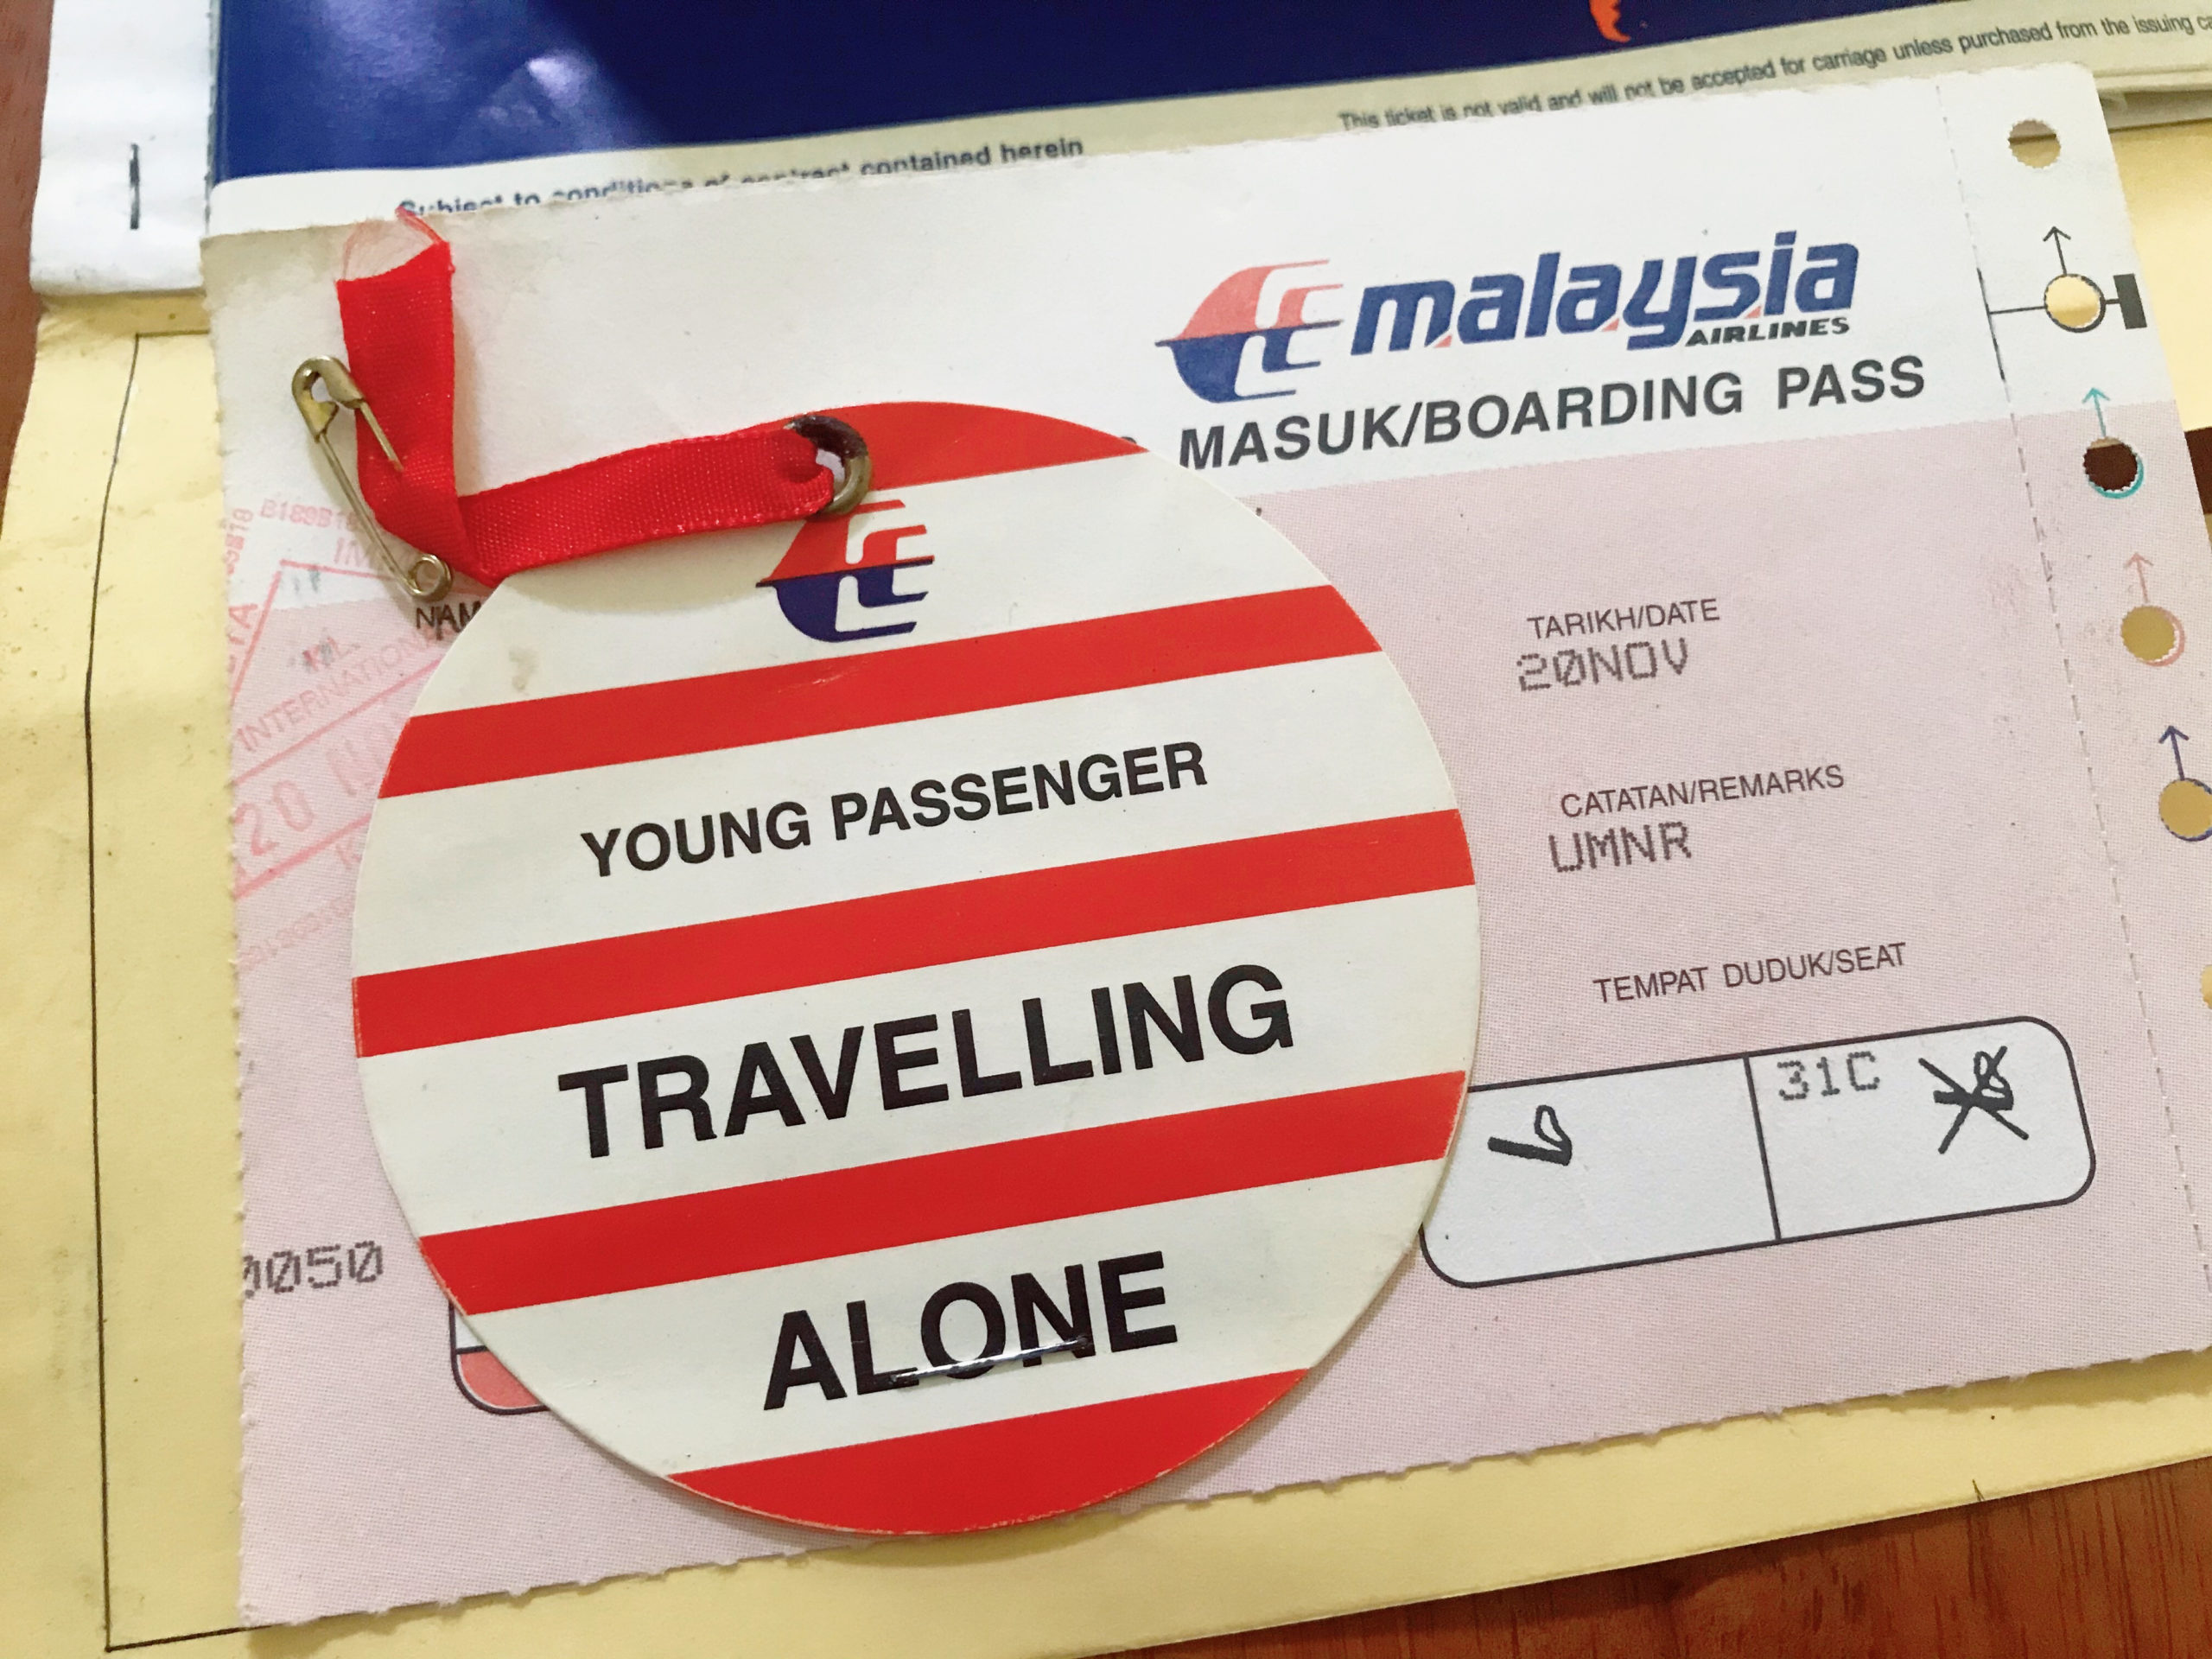 young passenger travelling alone airasia